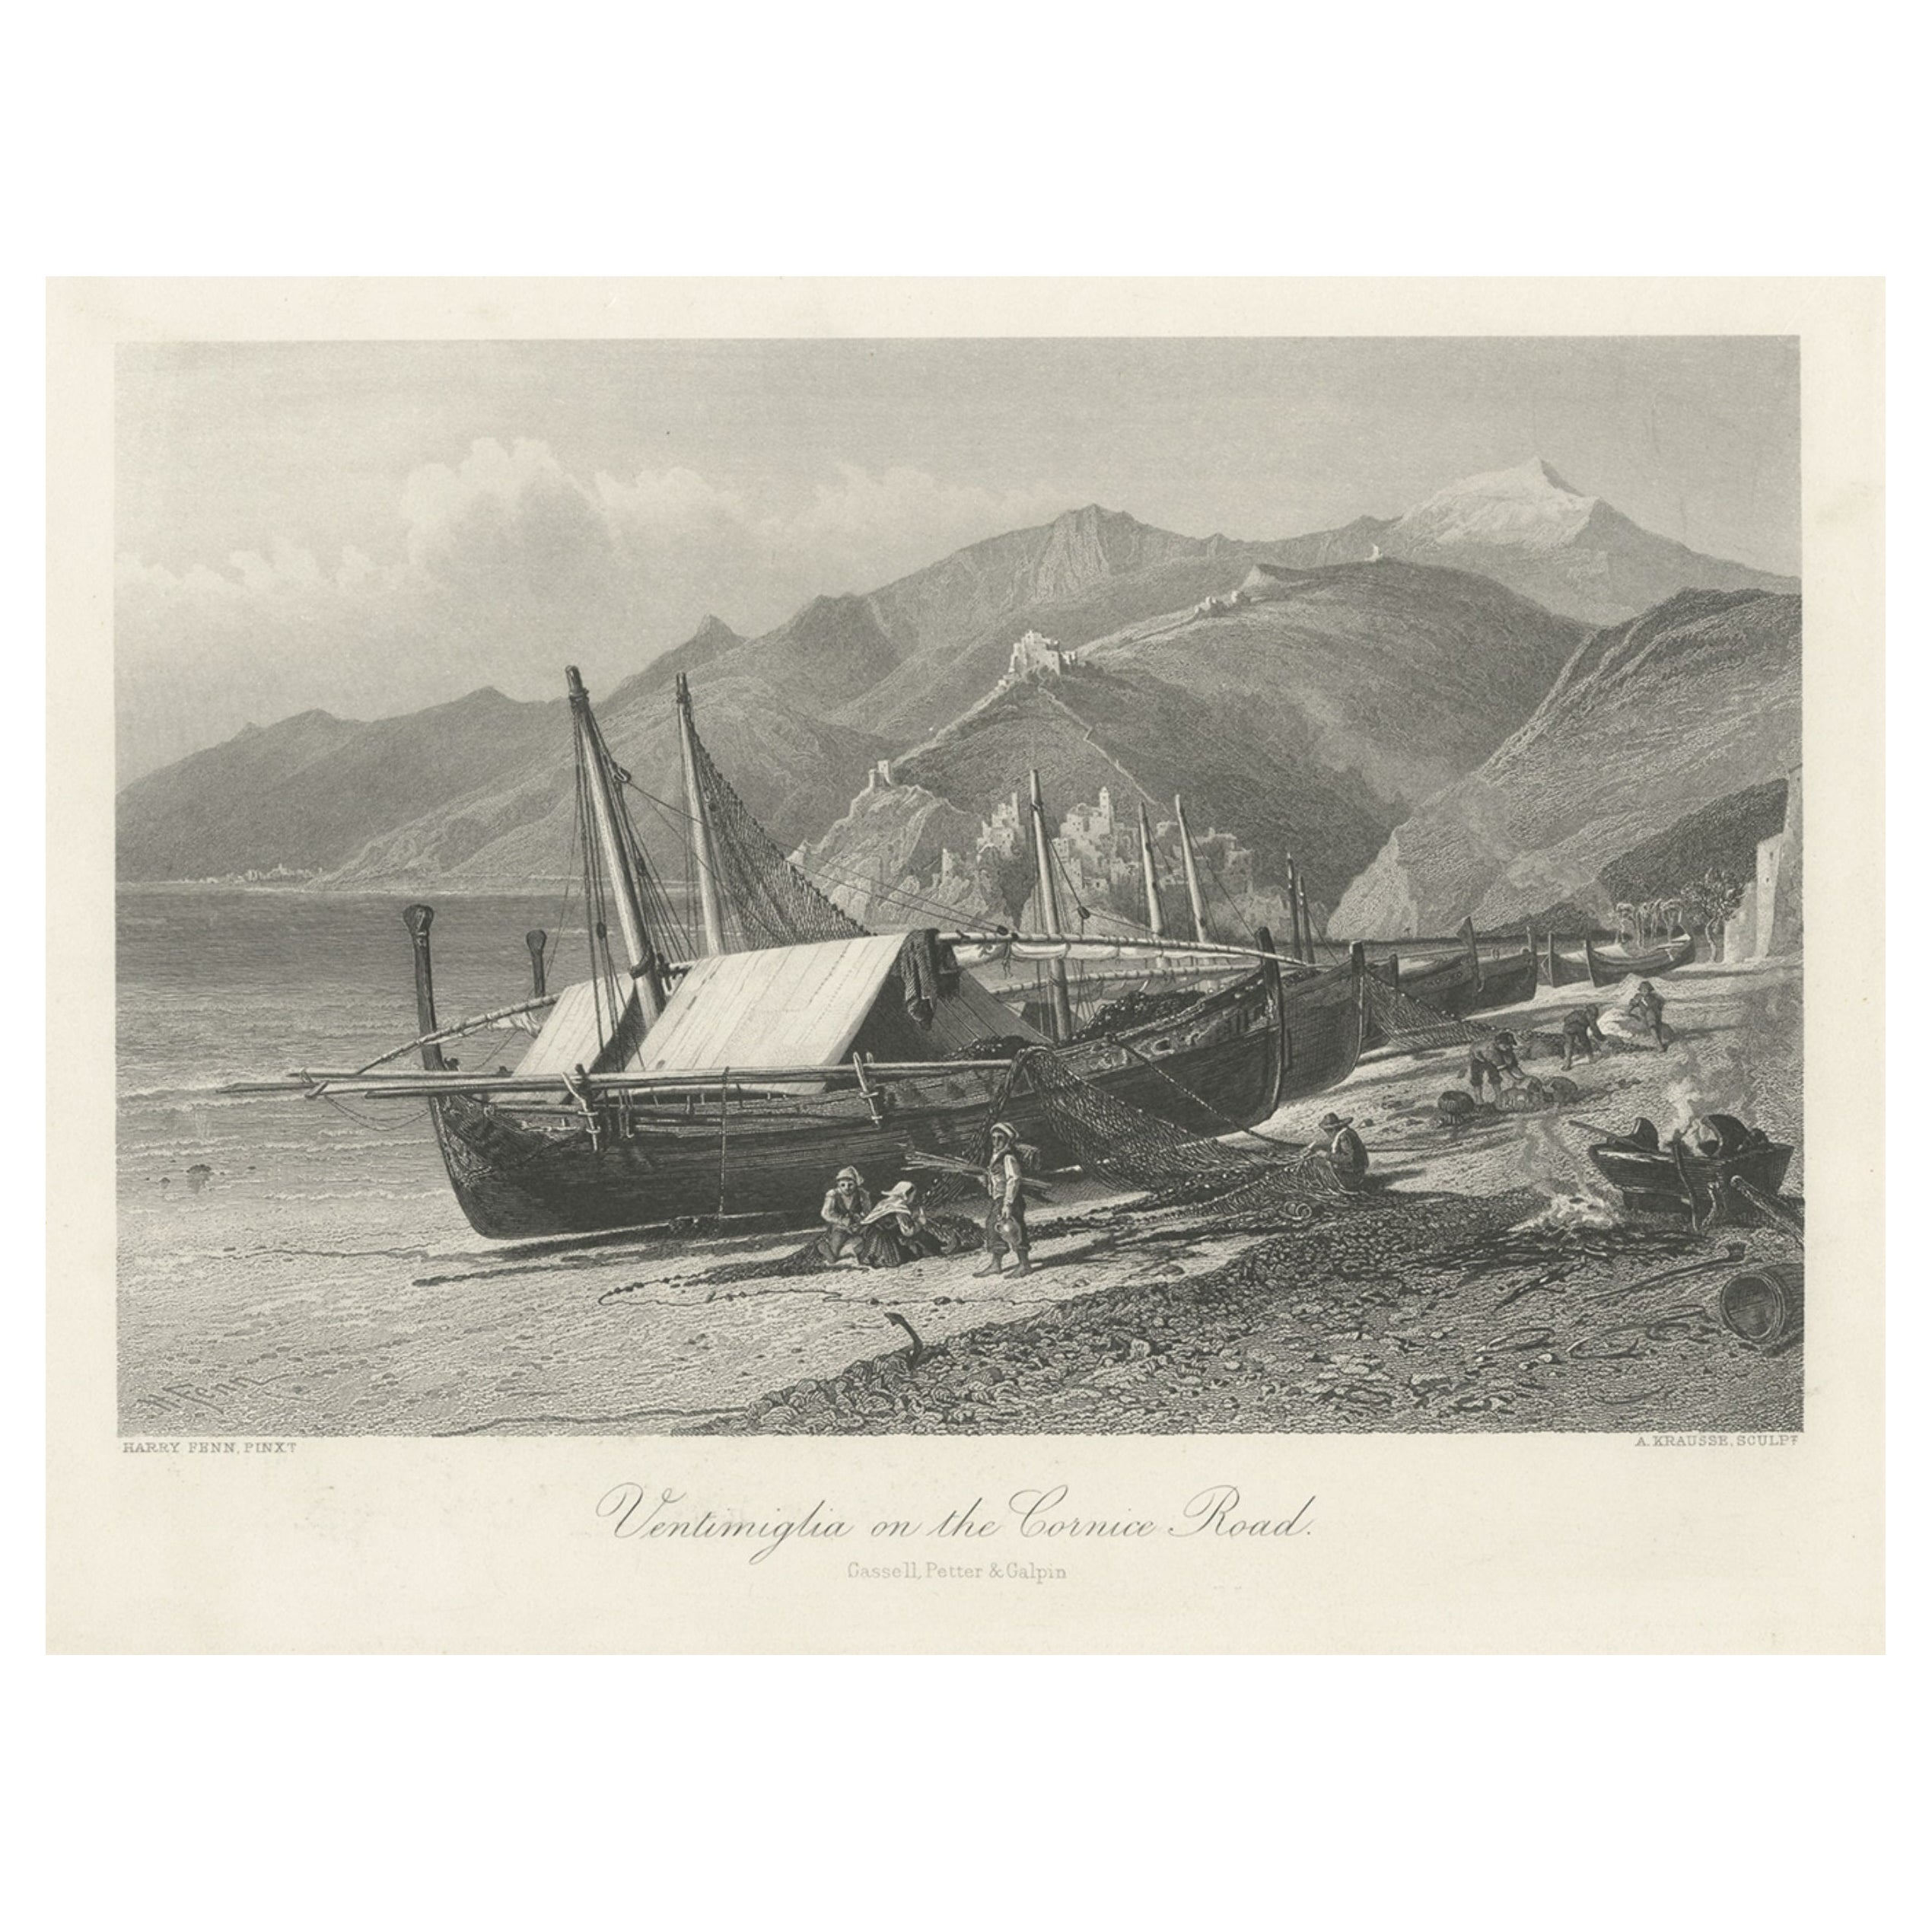 Antique Print Titled 'Ventimiglia on the Cornice Road' in Northern Italy, c.1880